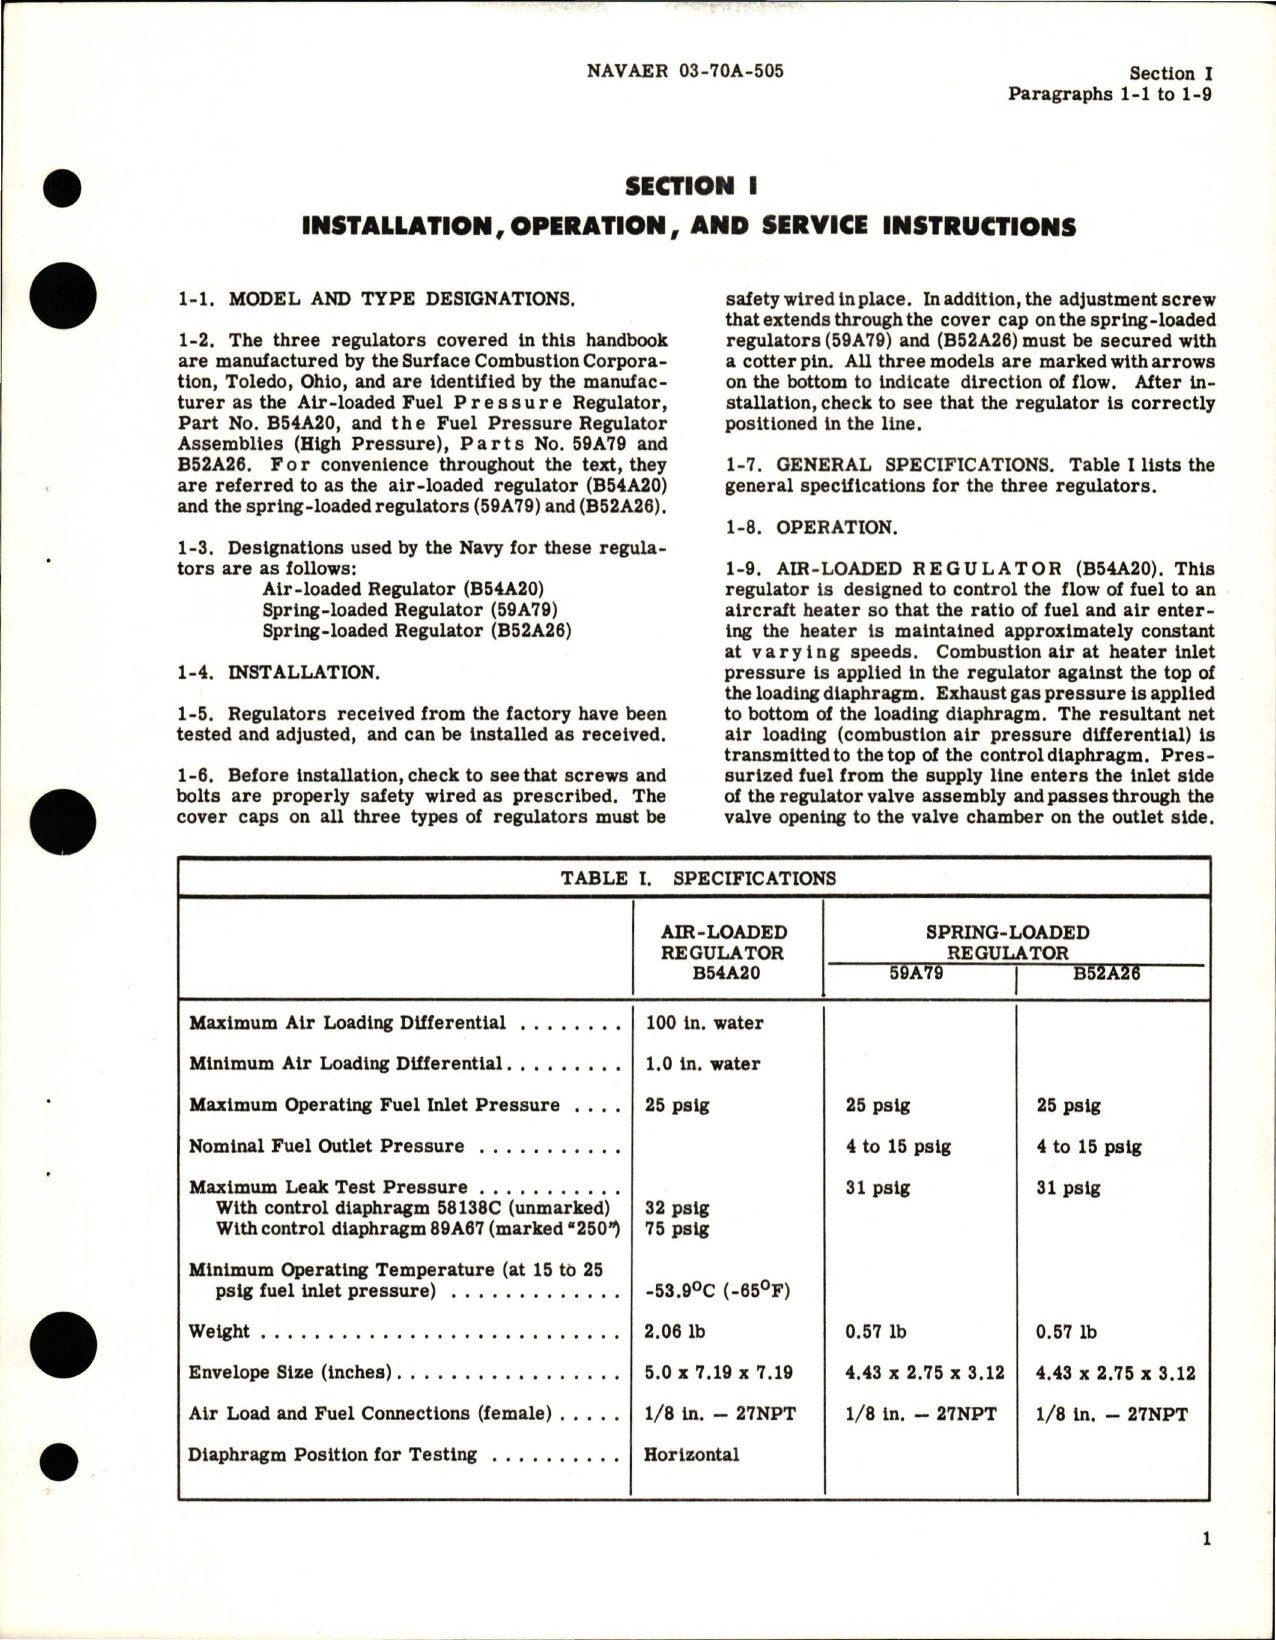 Sample page 5 from AirCorps Library document: Operation, Service and Overhaul Instructions with Parts Catalog for Pressure Regulators 